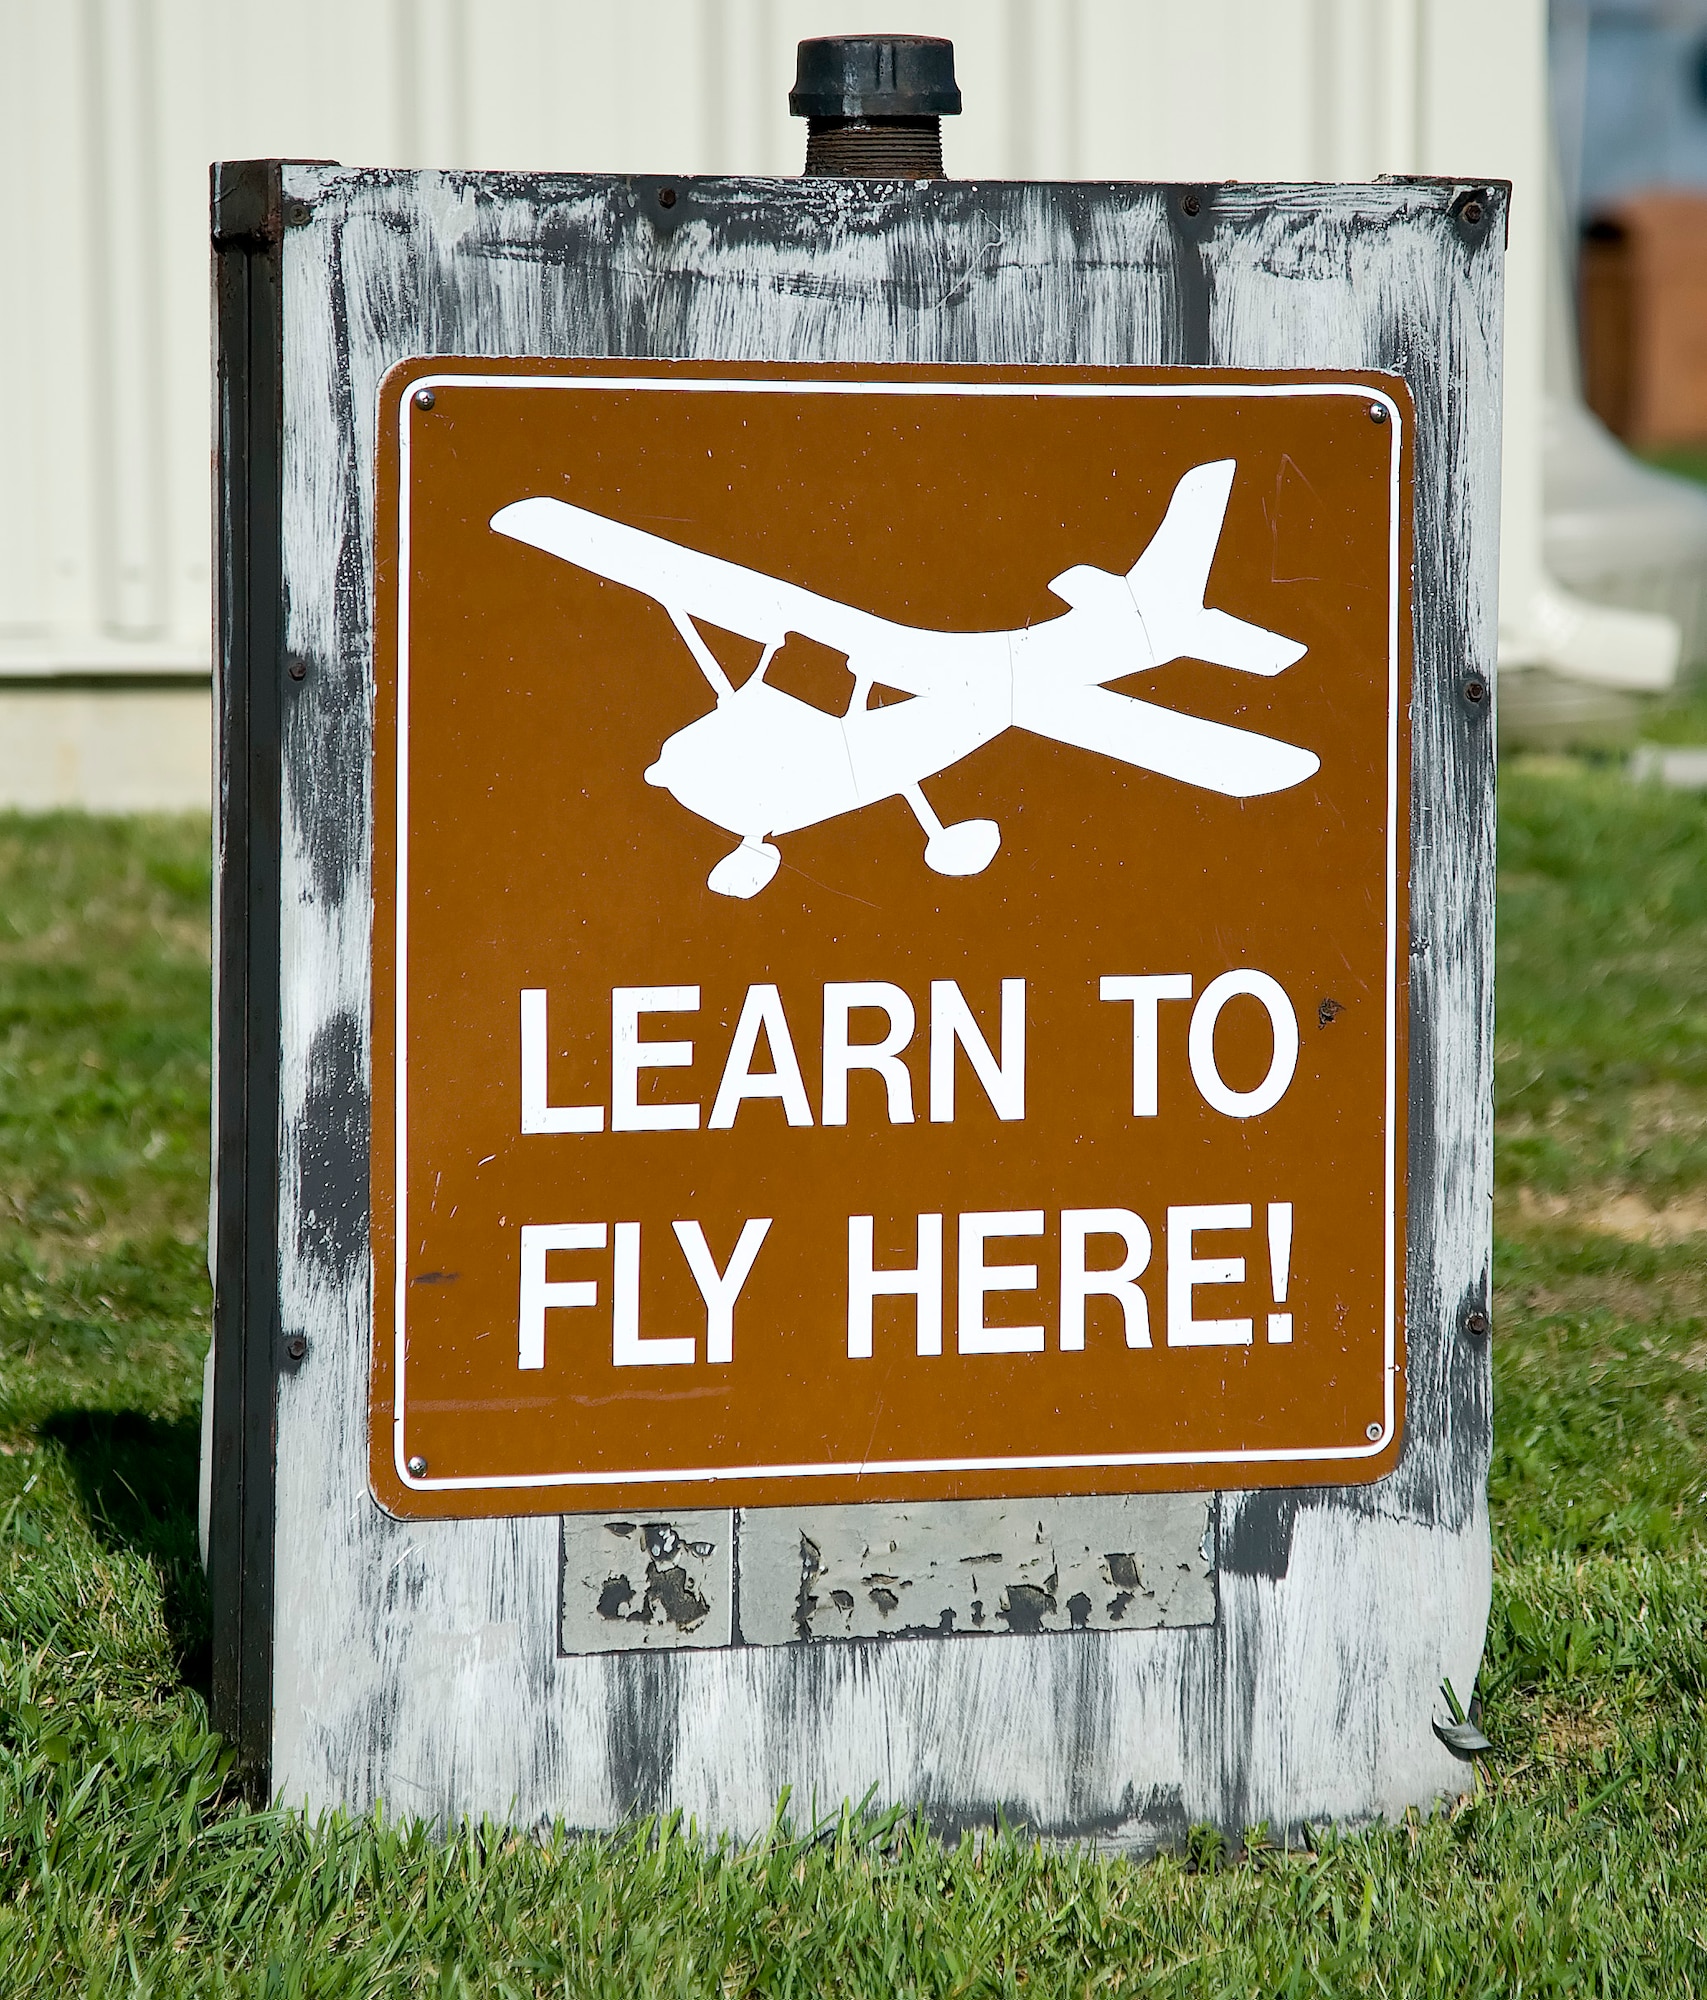 The Aero Club offers  “Learn to Fly” classes at Dover Air Force Base, Del., which provide training for private pilots for fun and vocation. (U.S. Air Force photo by Adrian R. Rowan)